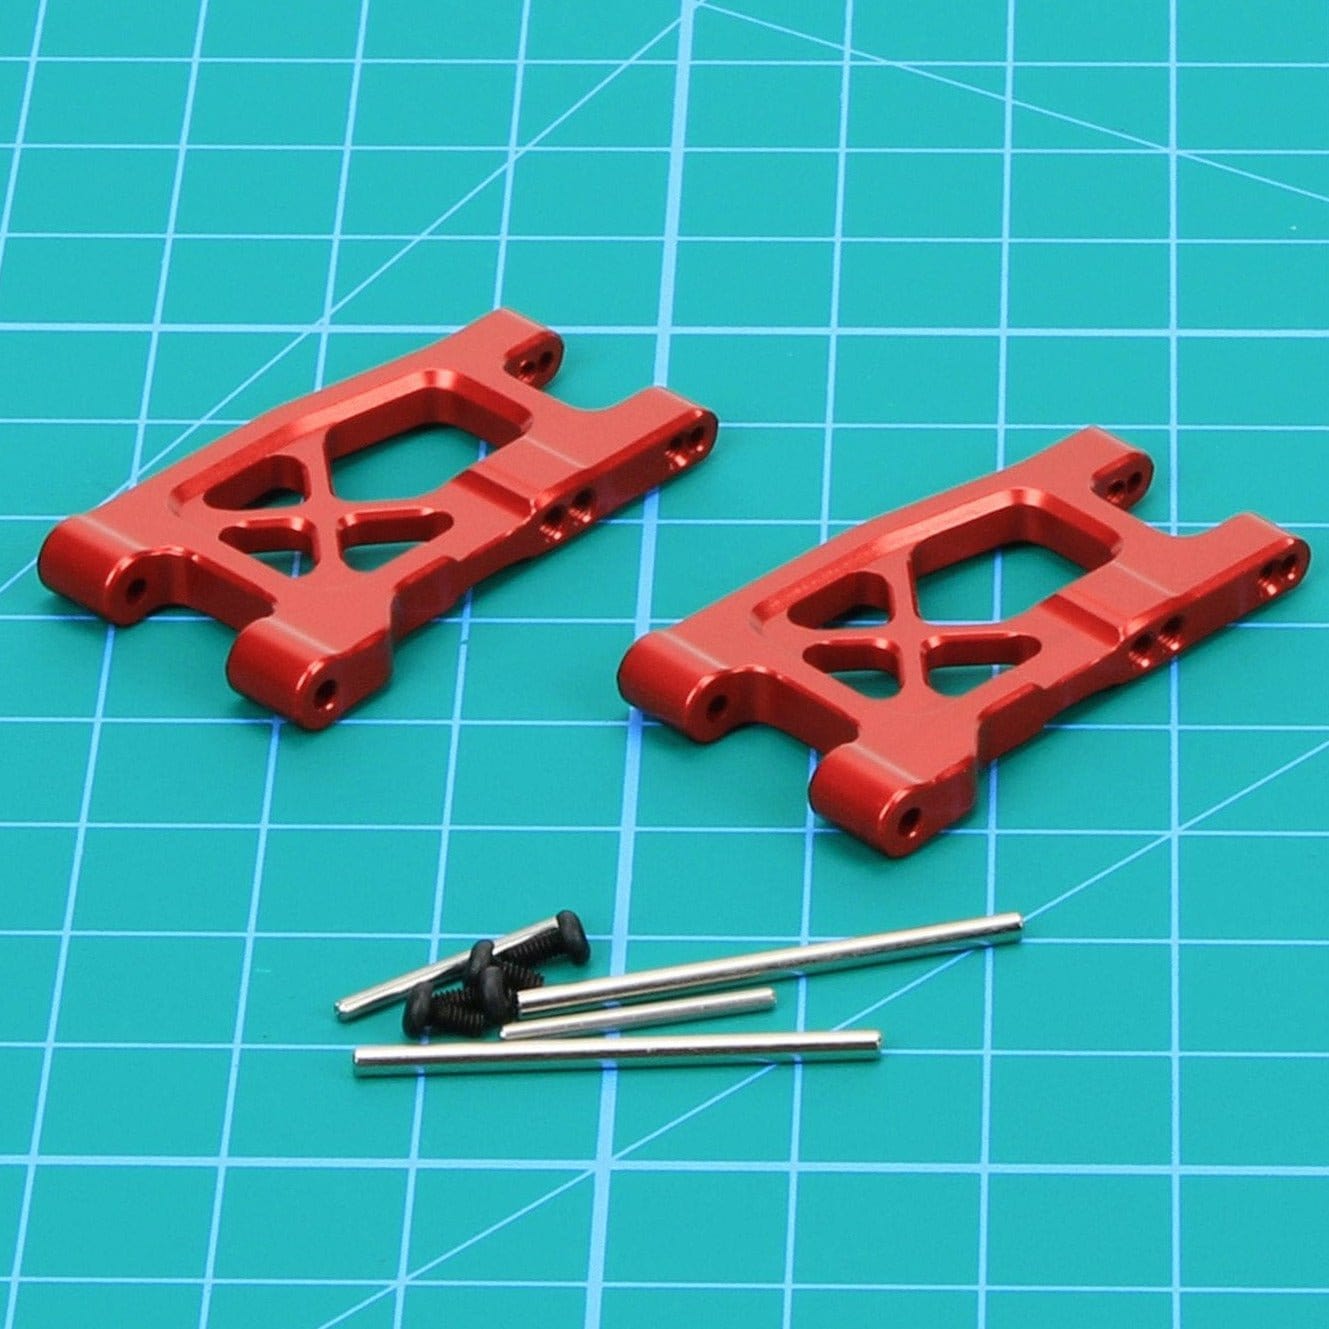 RCAWD Traxxas Latrax Red / F/R RCAWD Aluminium Front Rear Suspension Arms for 1/18 Traxxas Latrax Upgrades